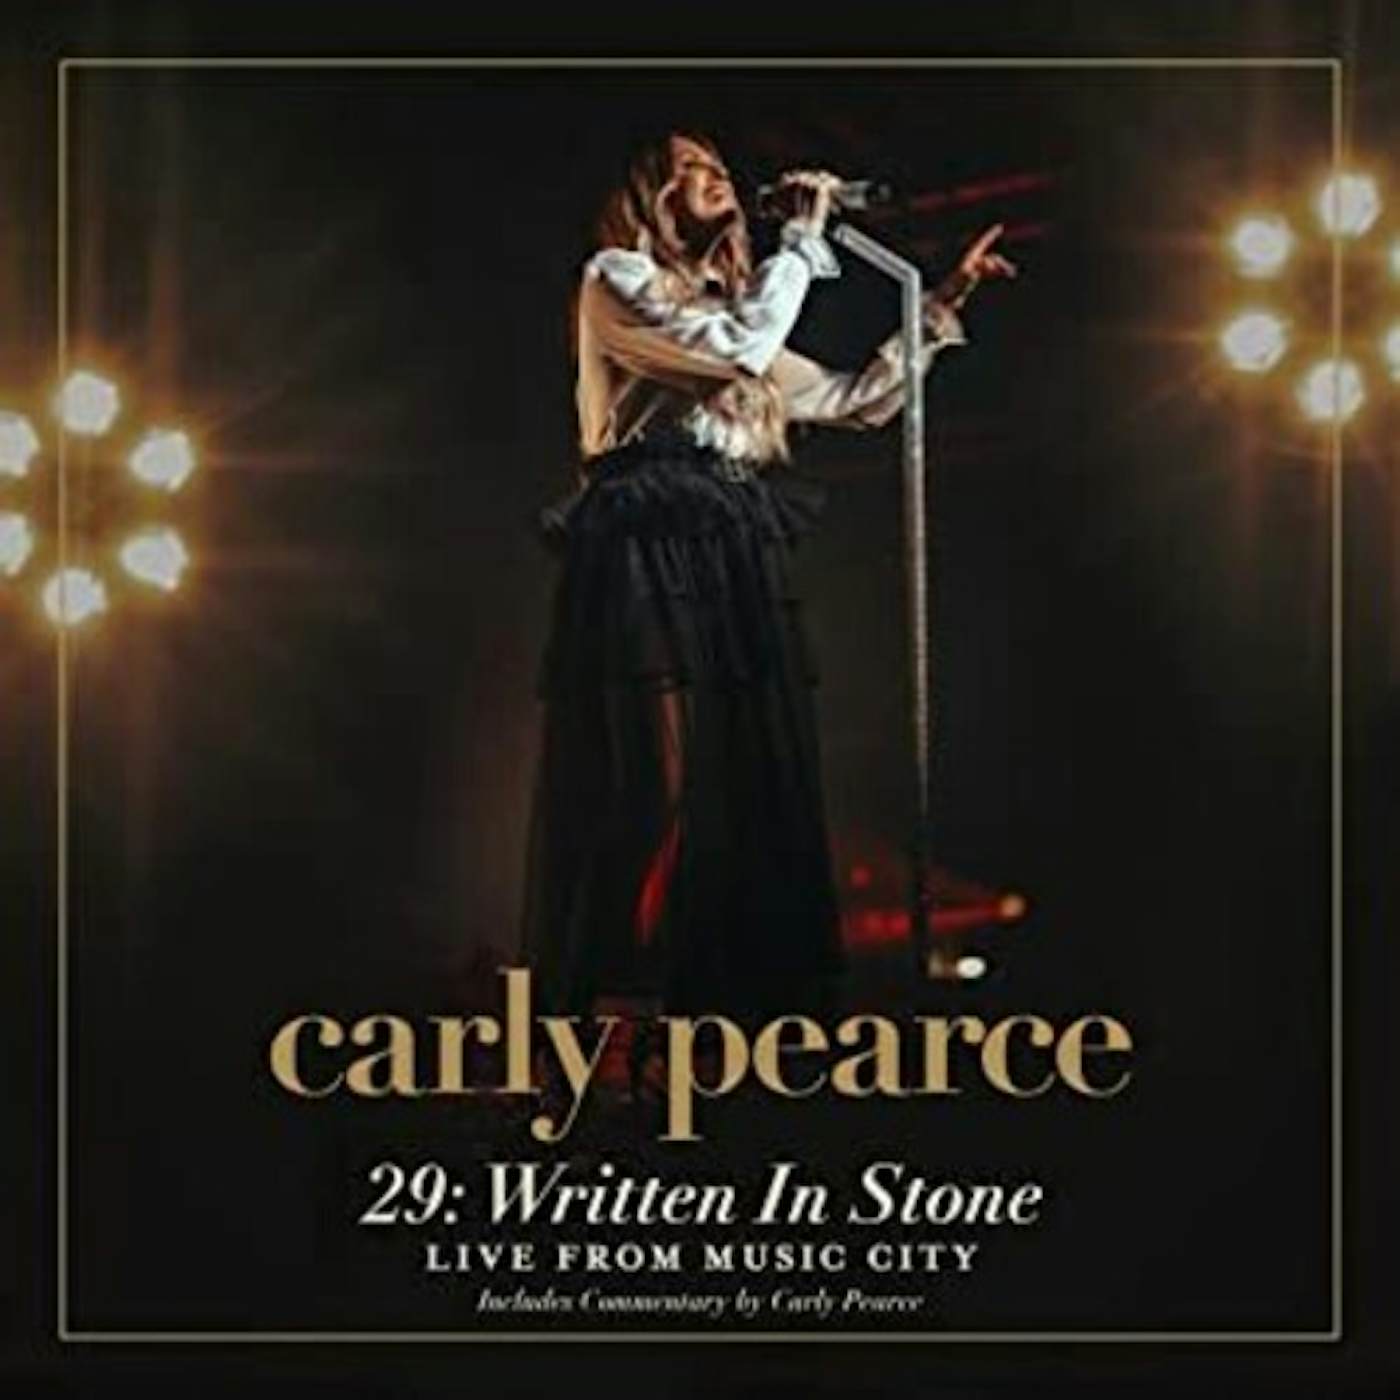 Carly Pearce 29: Written In Stone (Live From Music City) Vinyl Record